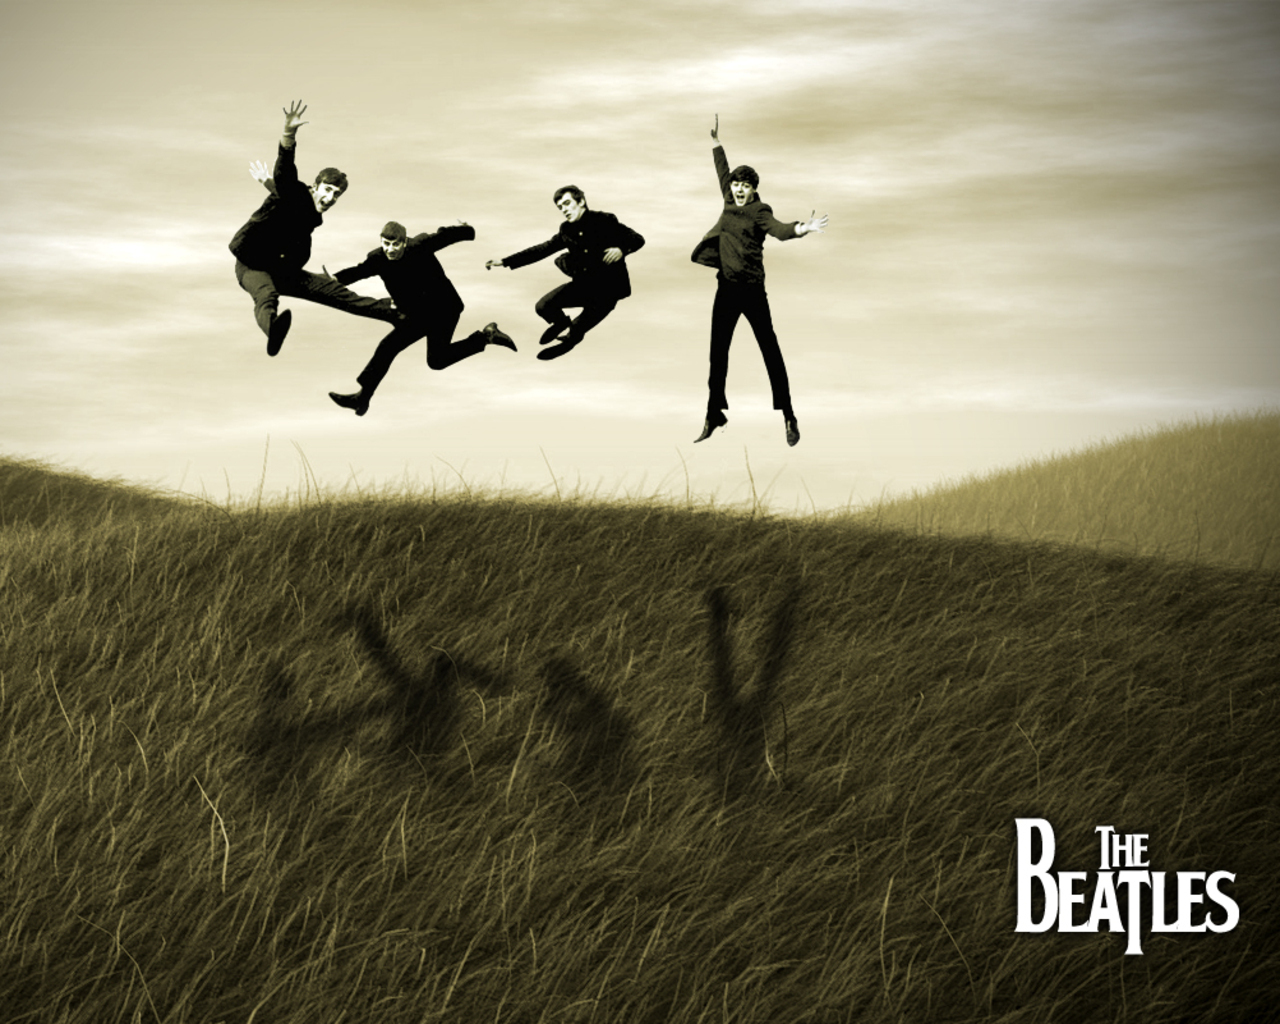 the beatles hd wallpaper,friendship,happy,font,photography,jumping